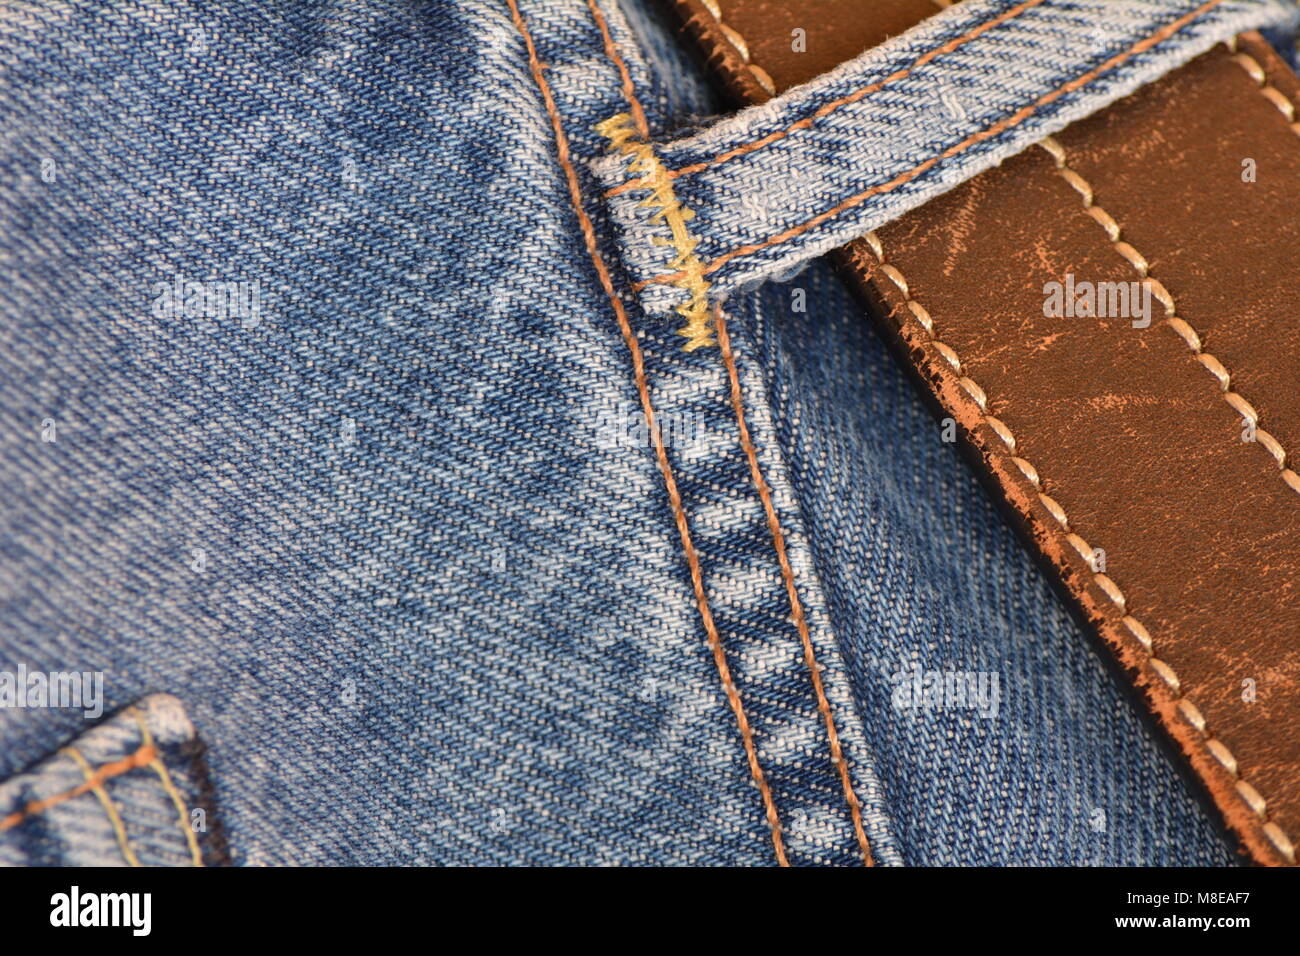 Pair of jeans with a battered leather belt, close-up Stock Photo